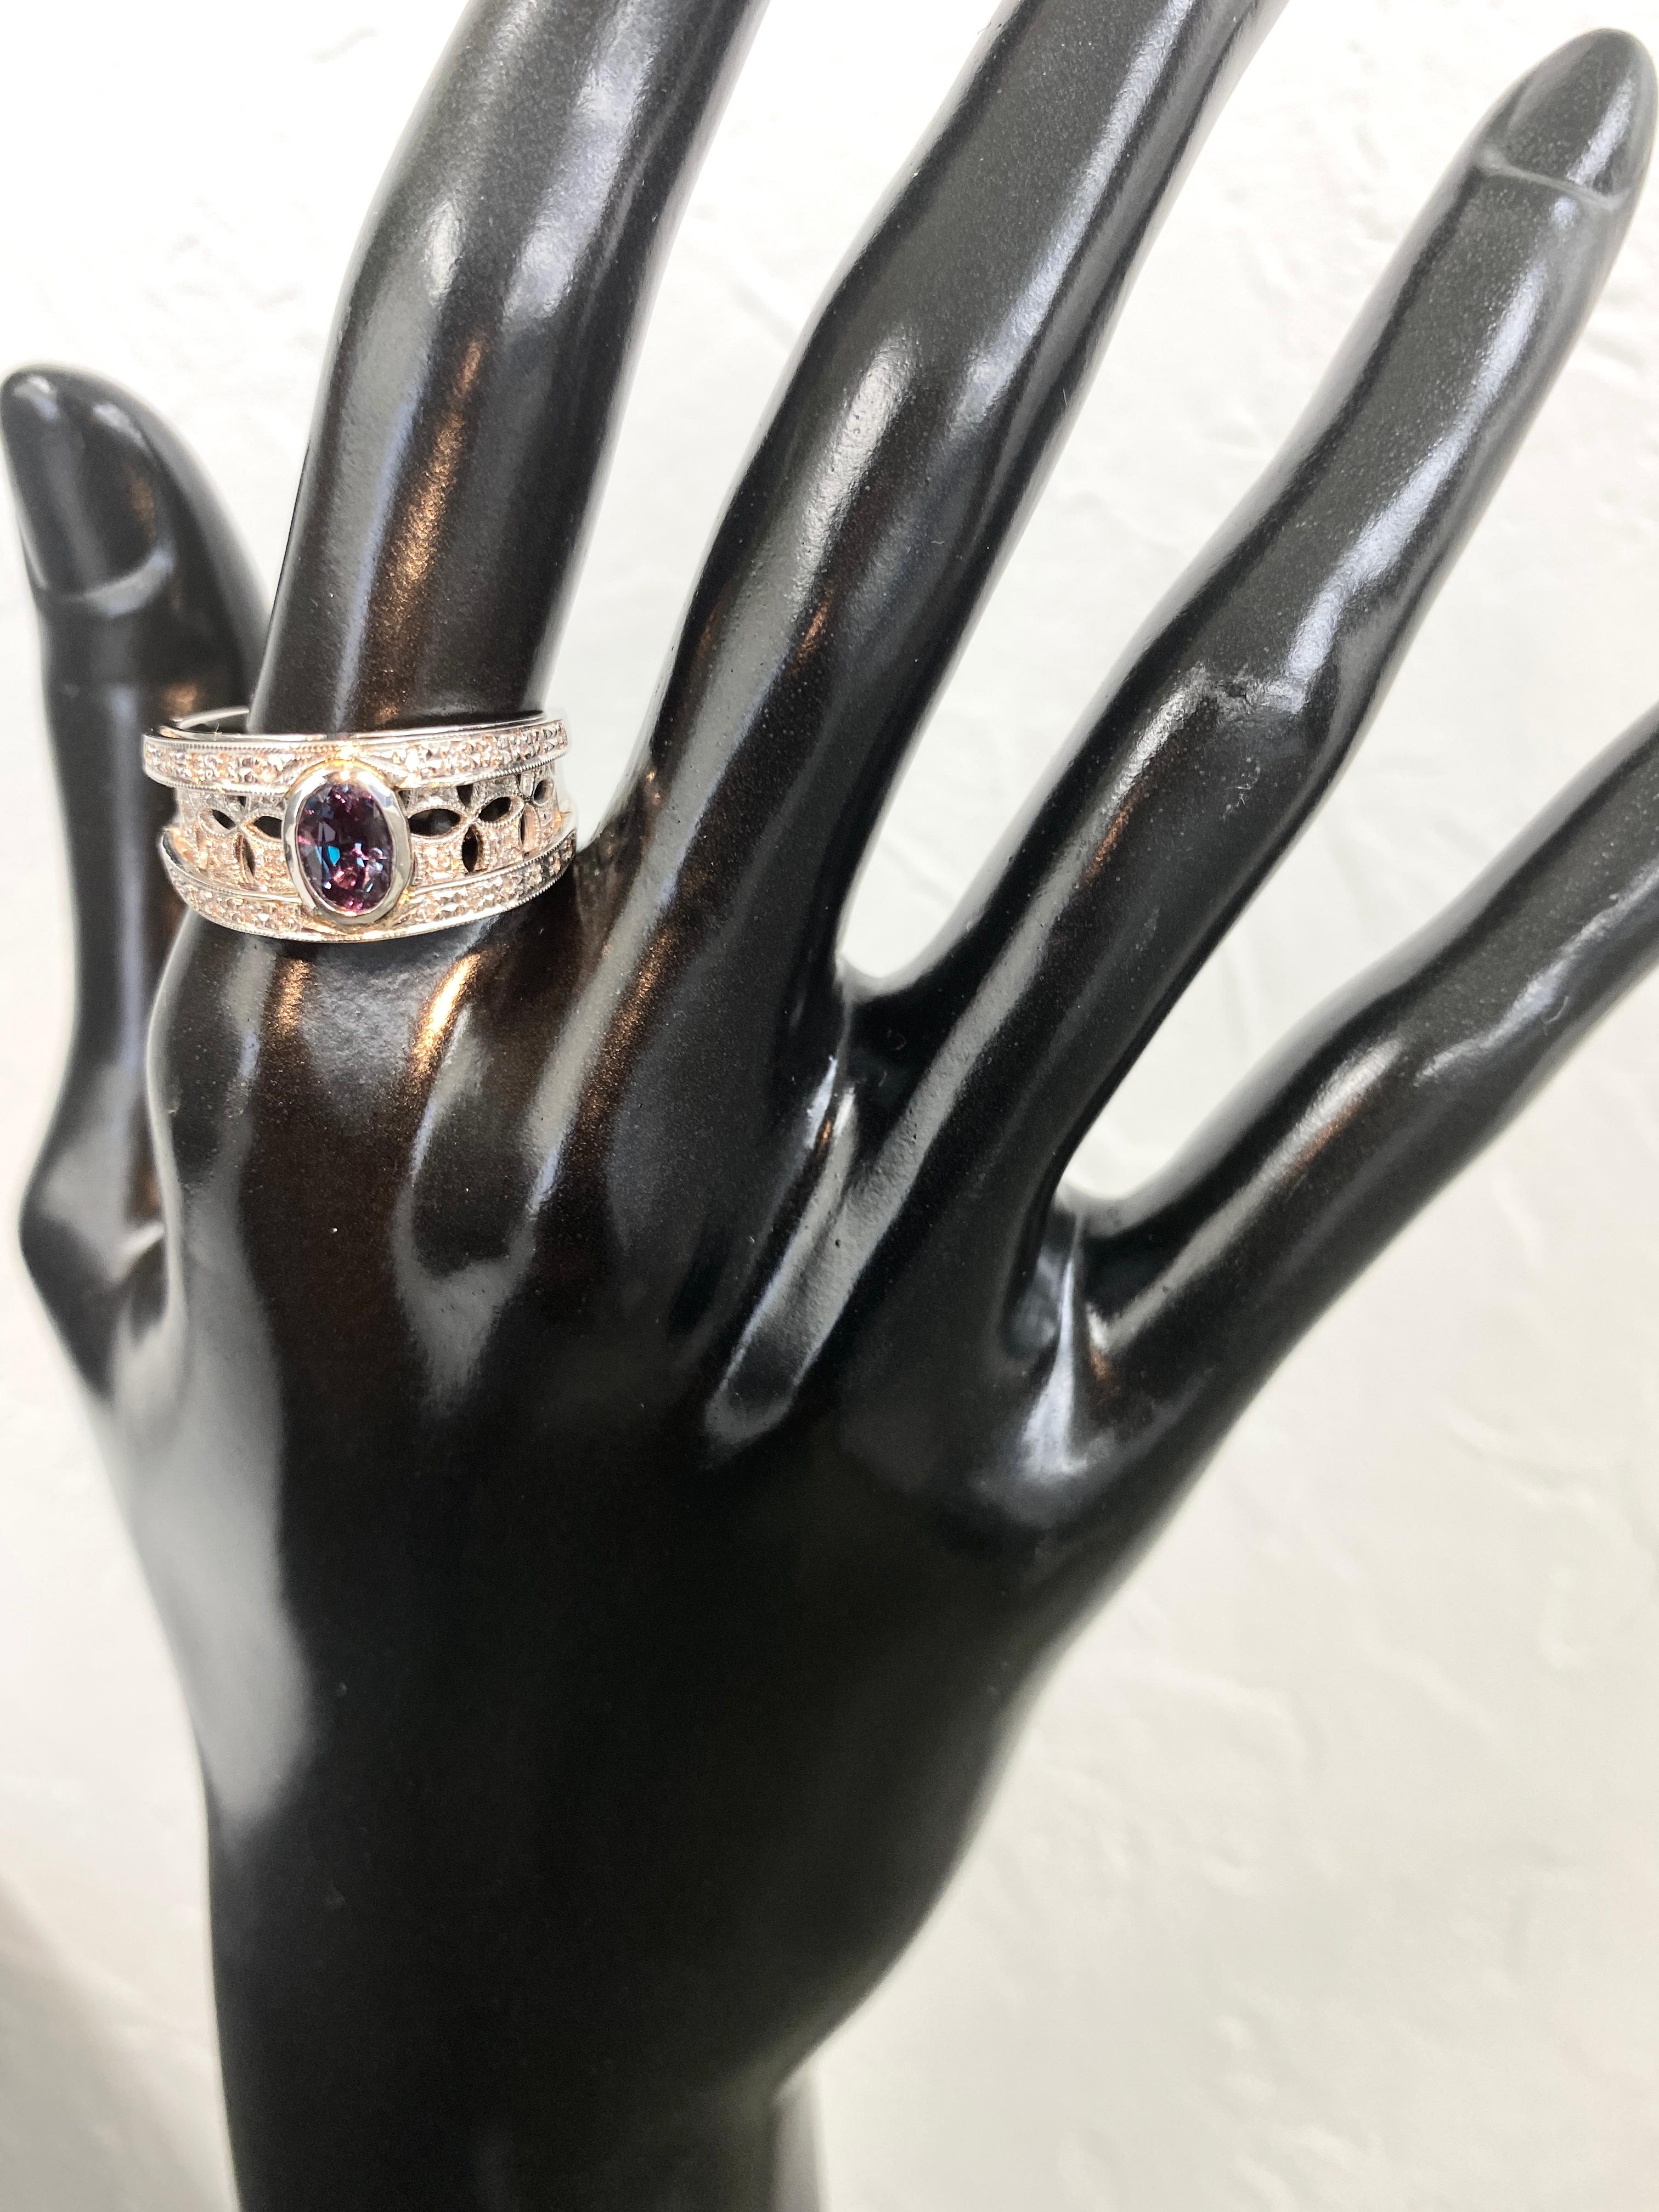 A gorgeous Band Ring featuring 0.61 Carat, Natural Alexandrite and 0.18 Carats of Diamond Accents set in Platinum. Alexandrites produce a natural color-change phenomenon as they exhibit a Bluish Green Color under Fluorescent Light whereas a Purplish